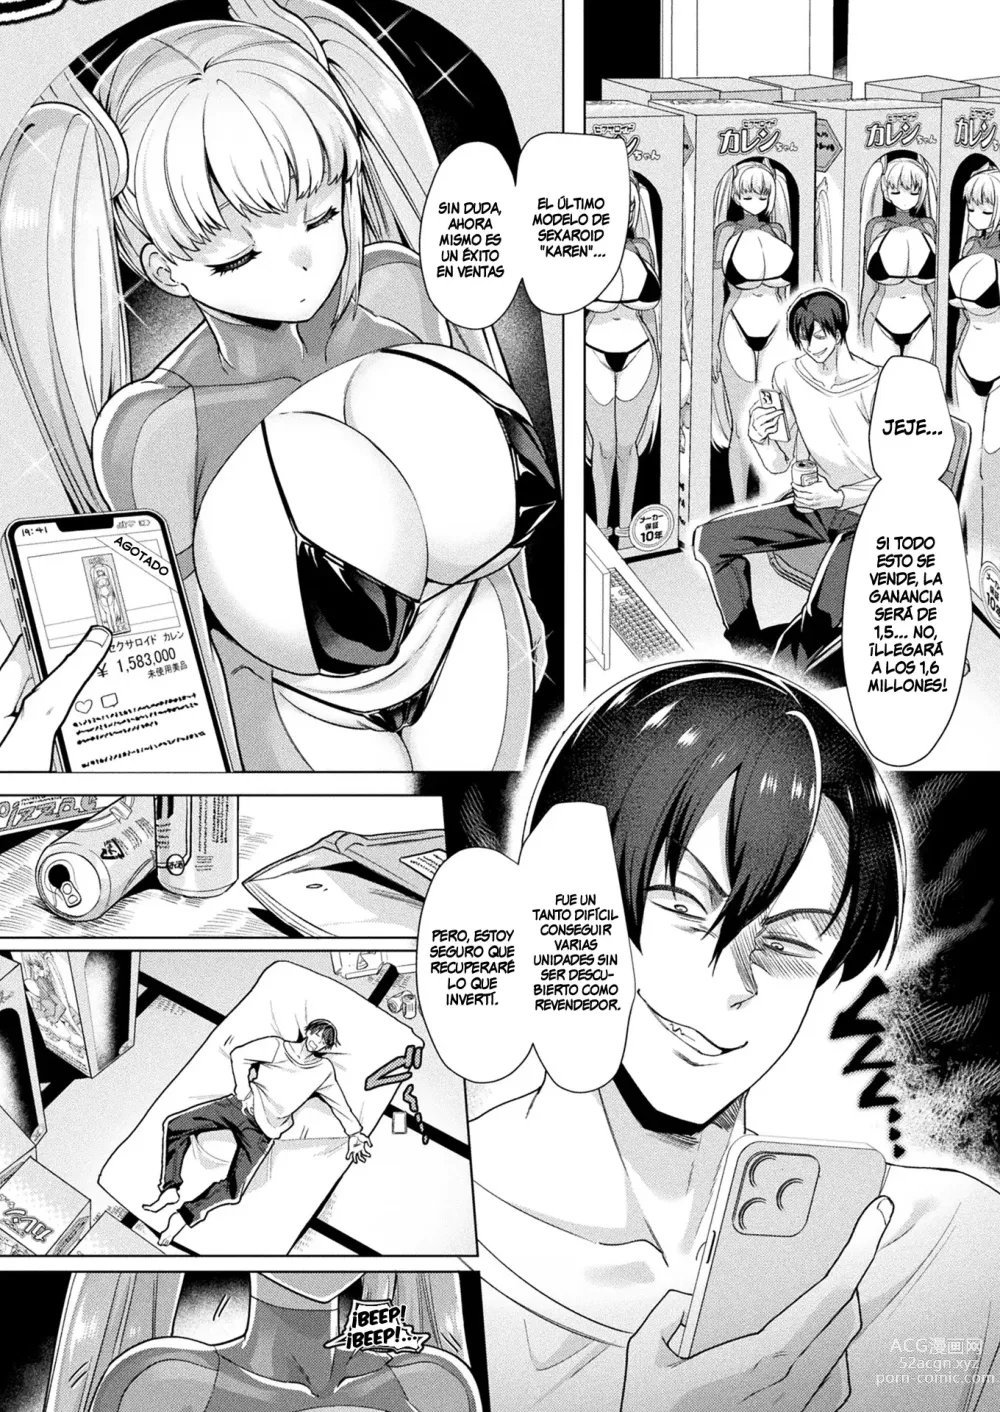 Page 2 of manga Sexaroids vs. Reseller